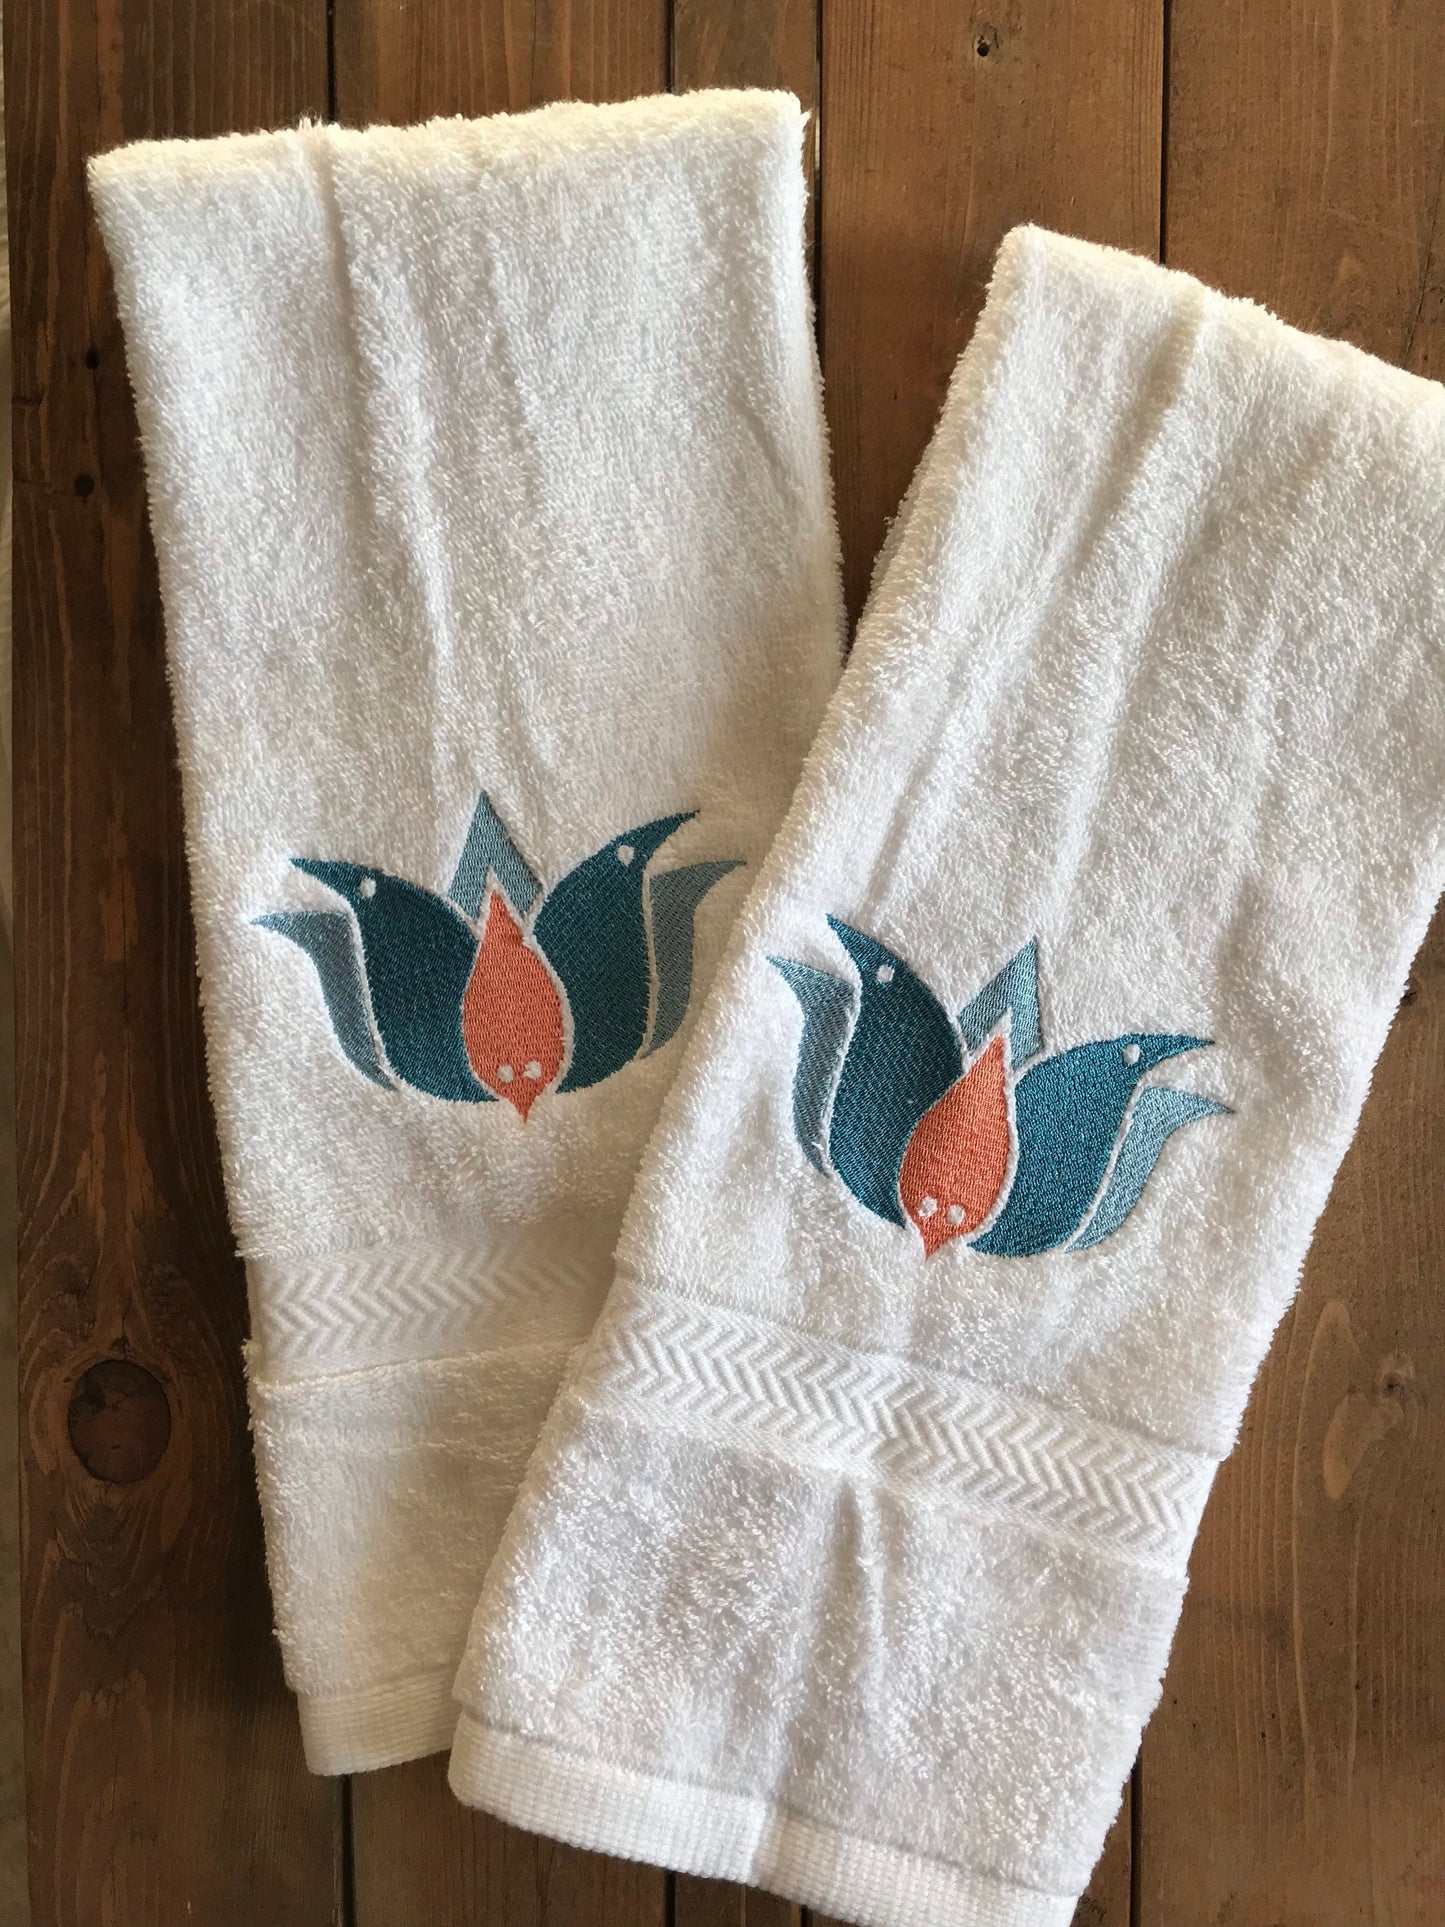 Personalized Bathroom Hand Towels -Cotton- Embroidered-Choose your Colors - Bath Towel for Powder Room - Custom Design - Your Design